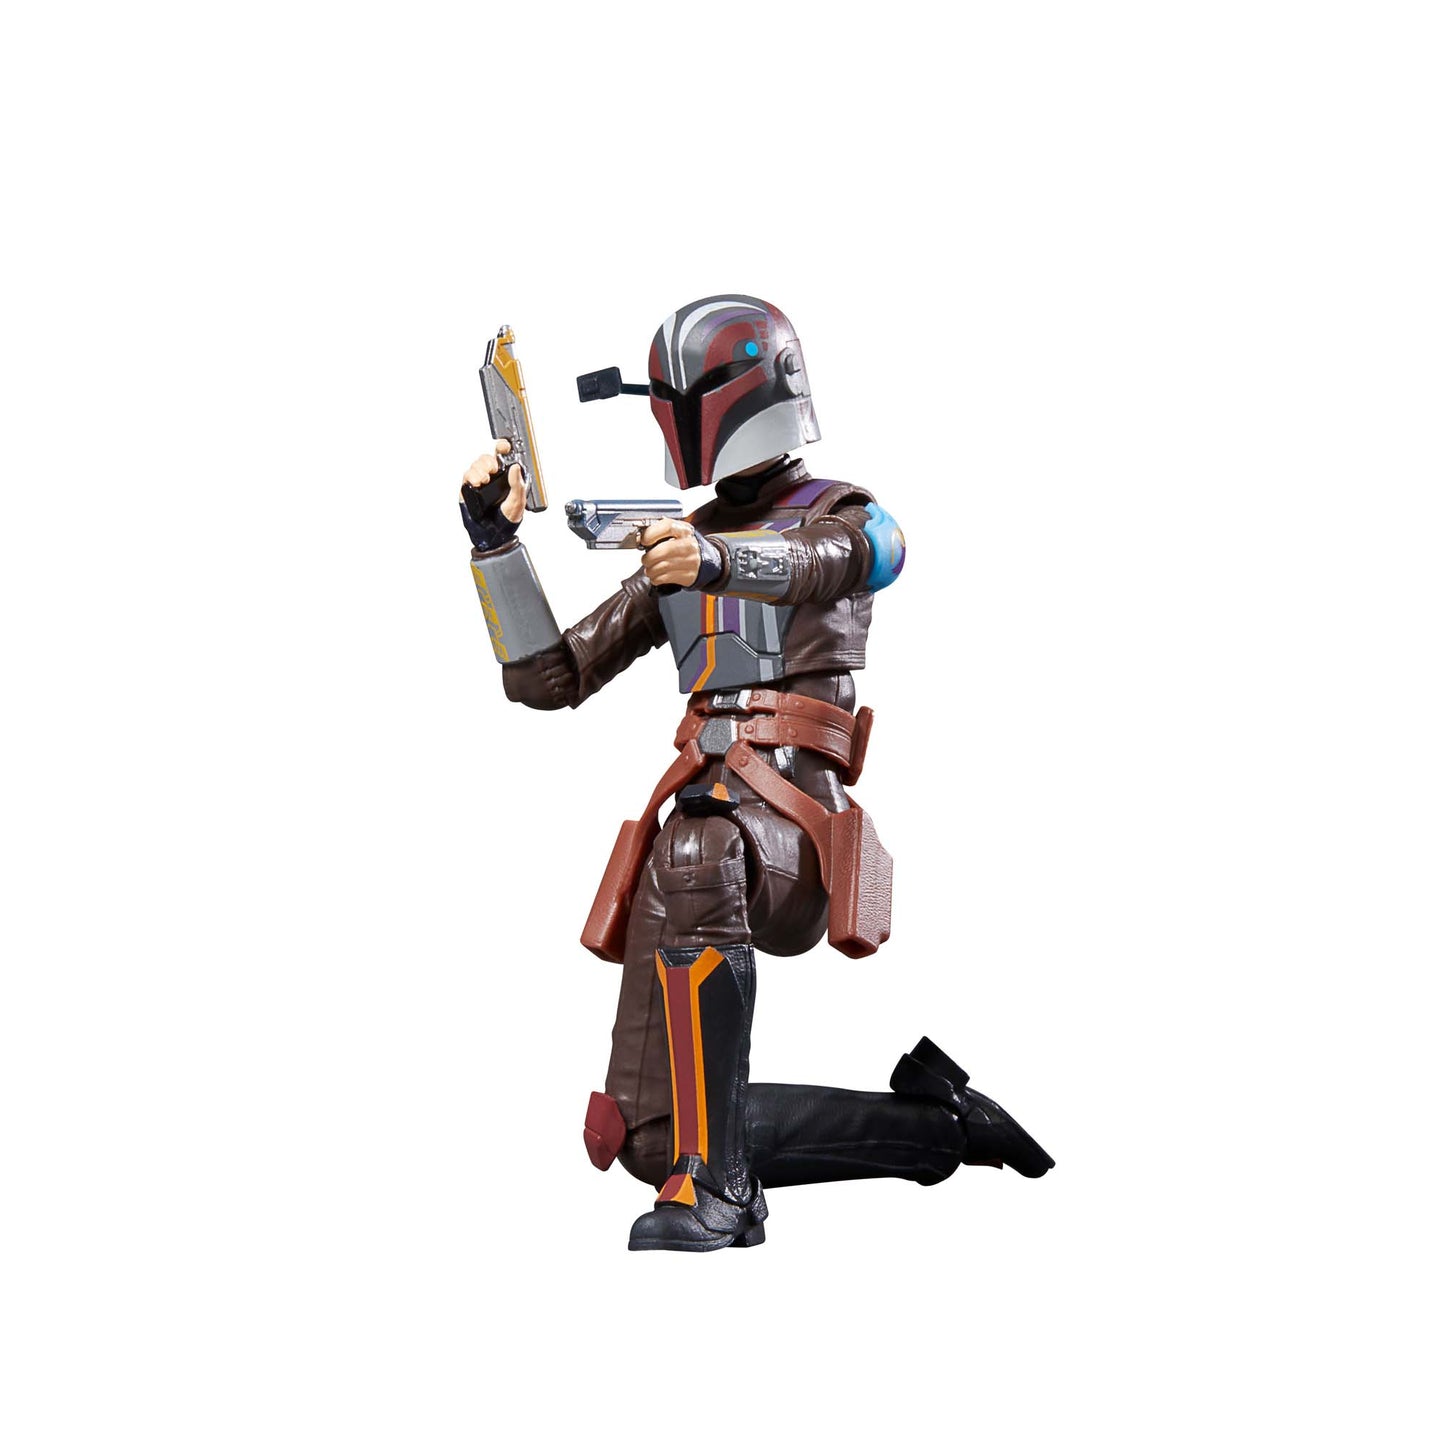 Star Wars The Black Series Sabine Wren 6-Inch Action Figure Toy attacking with gun - Heretoserveyou